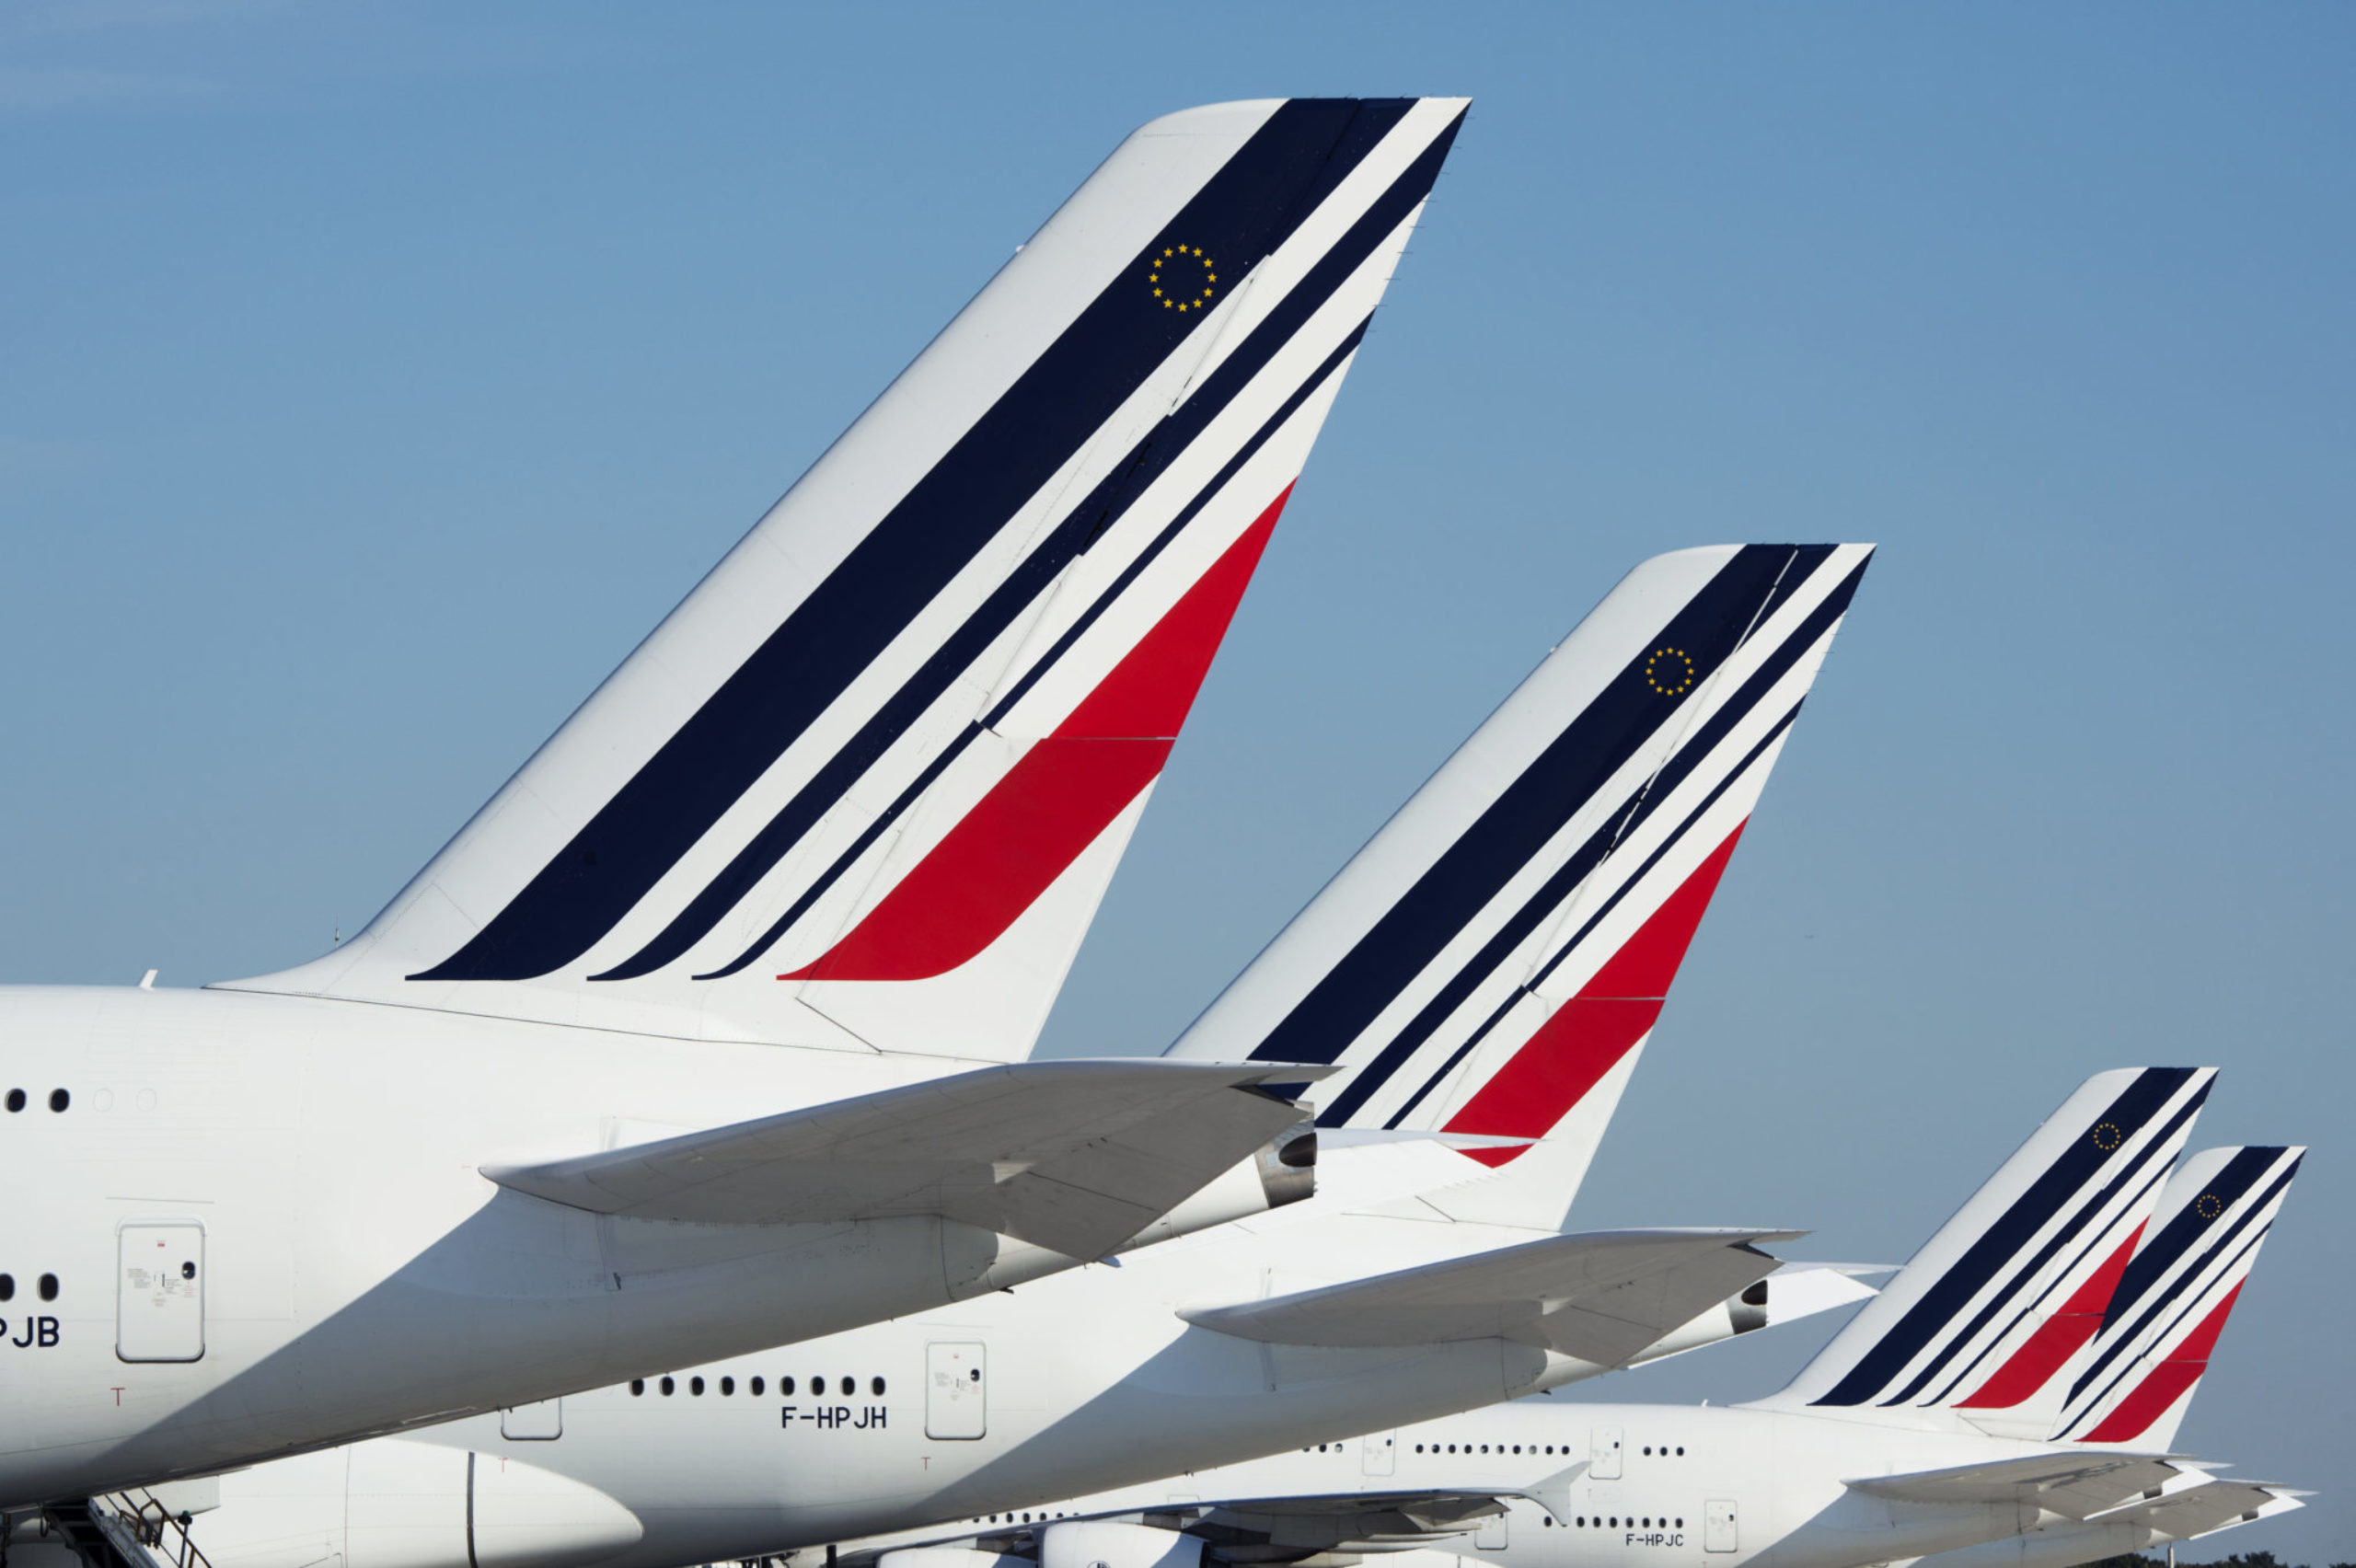 air-france-luggage-allowance-excess-baggage-fees-sherpr